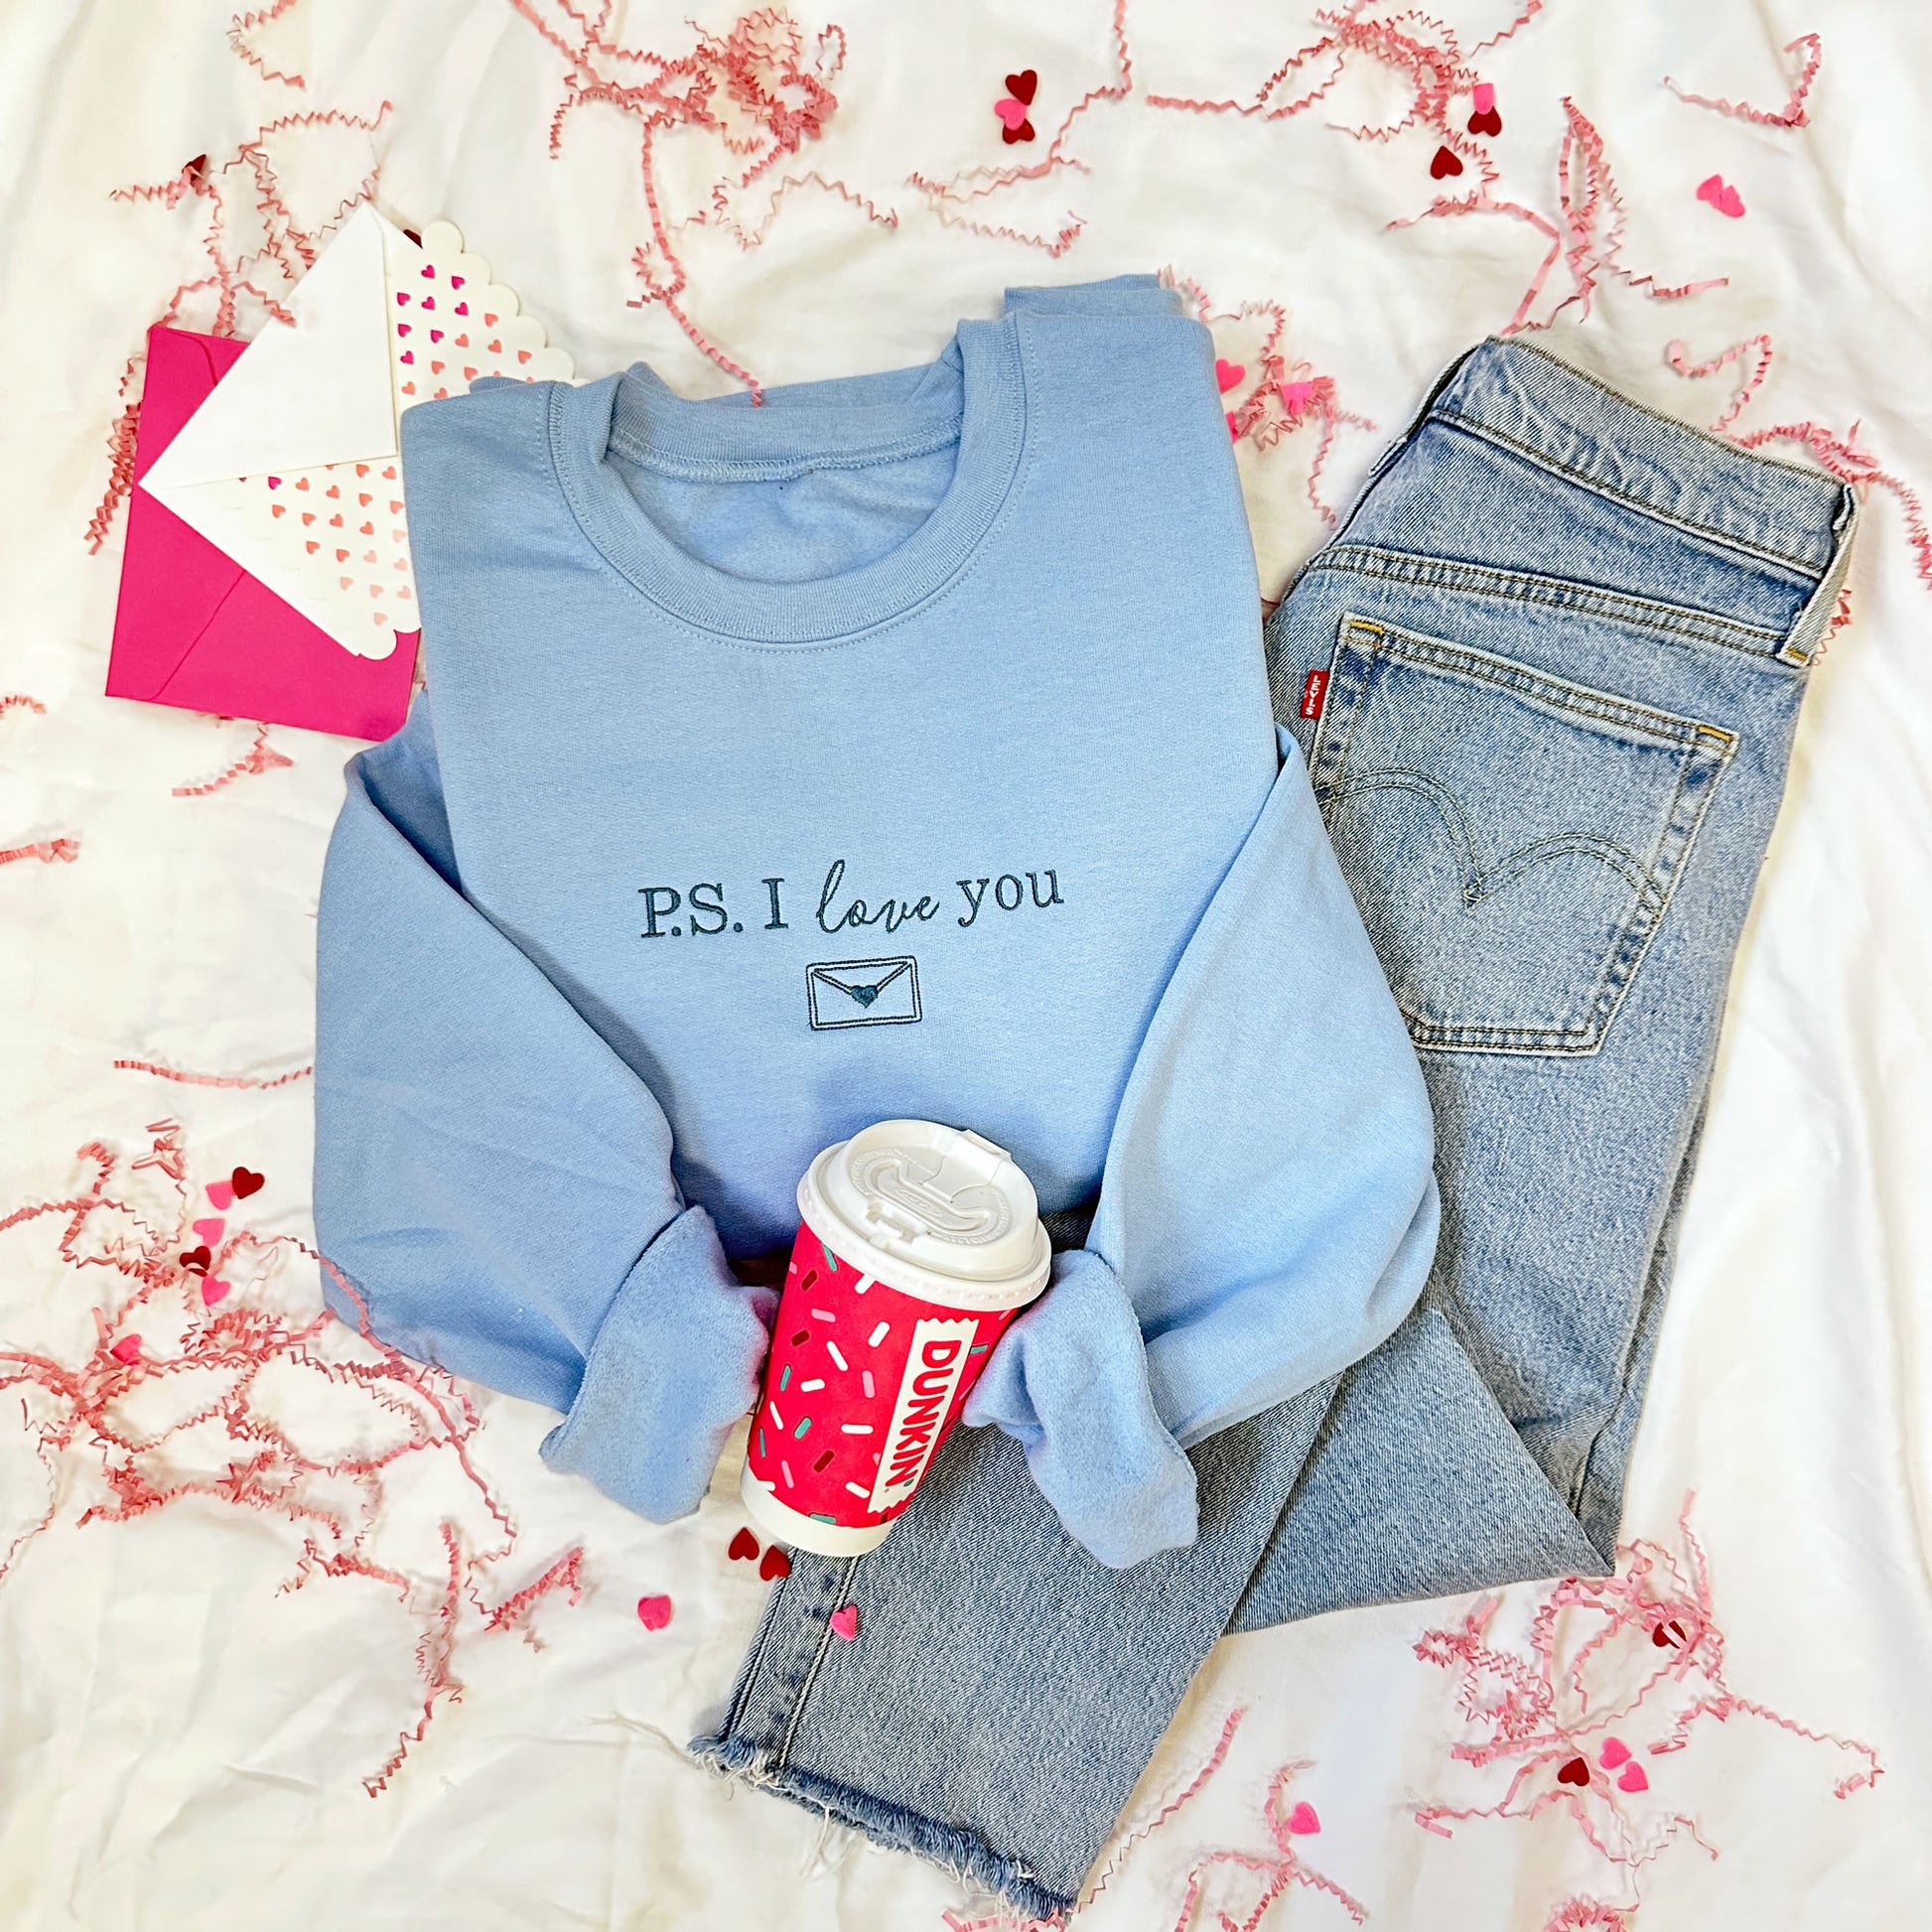 flat lay image of jeans, dunkin' coffee cup, and a blue crewneck sweatshirt with a P.S. I love you design embroidered across the chest